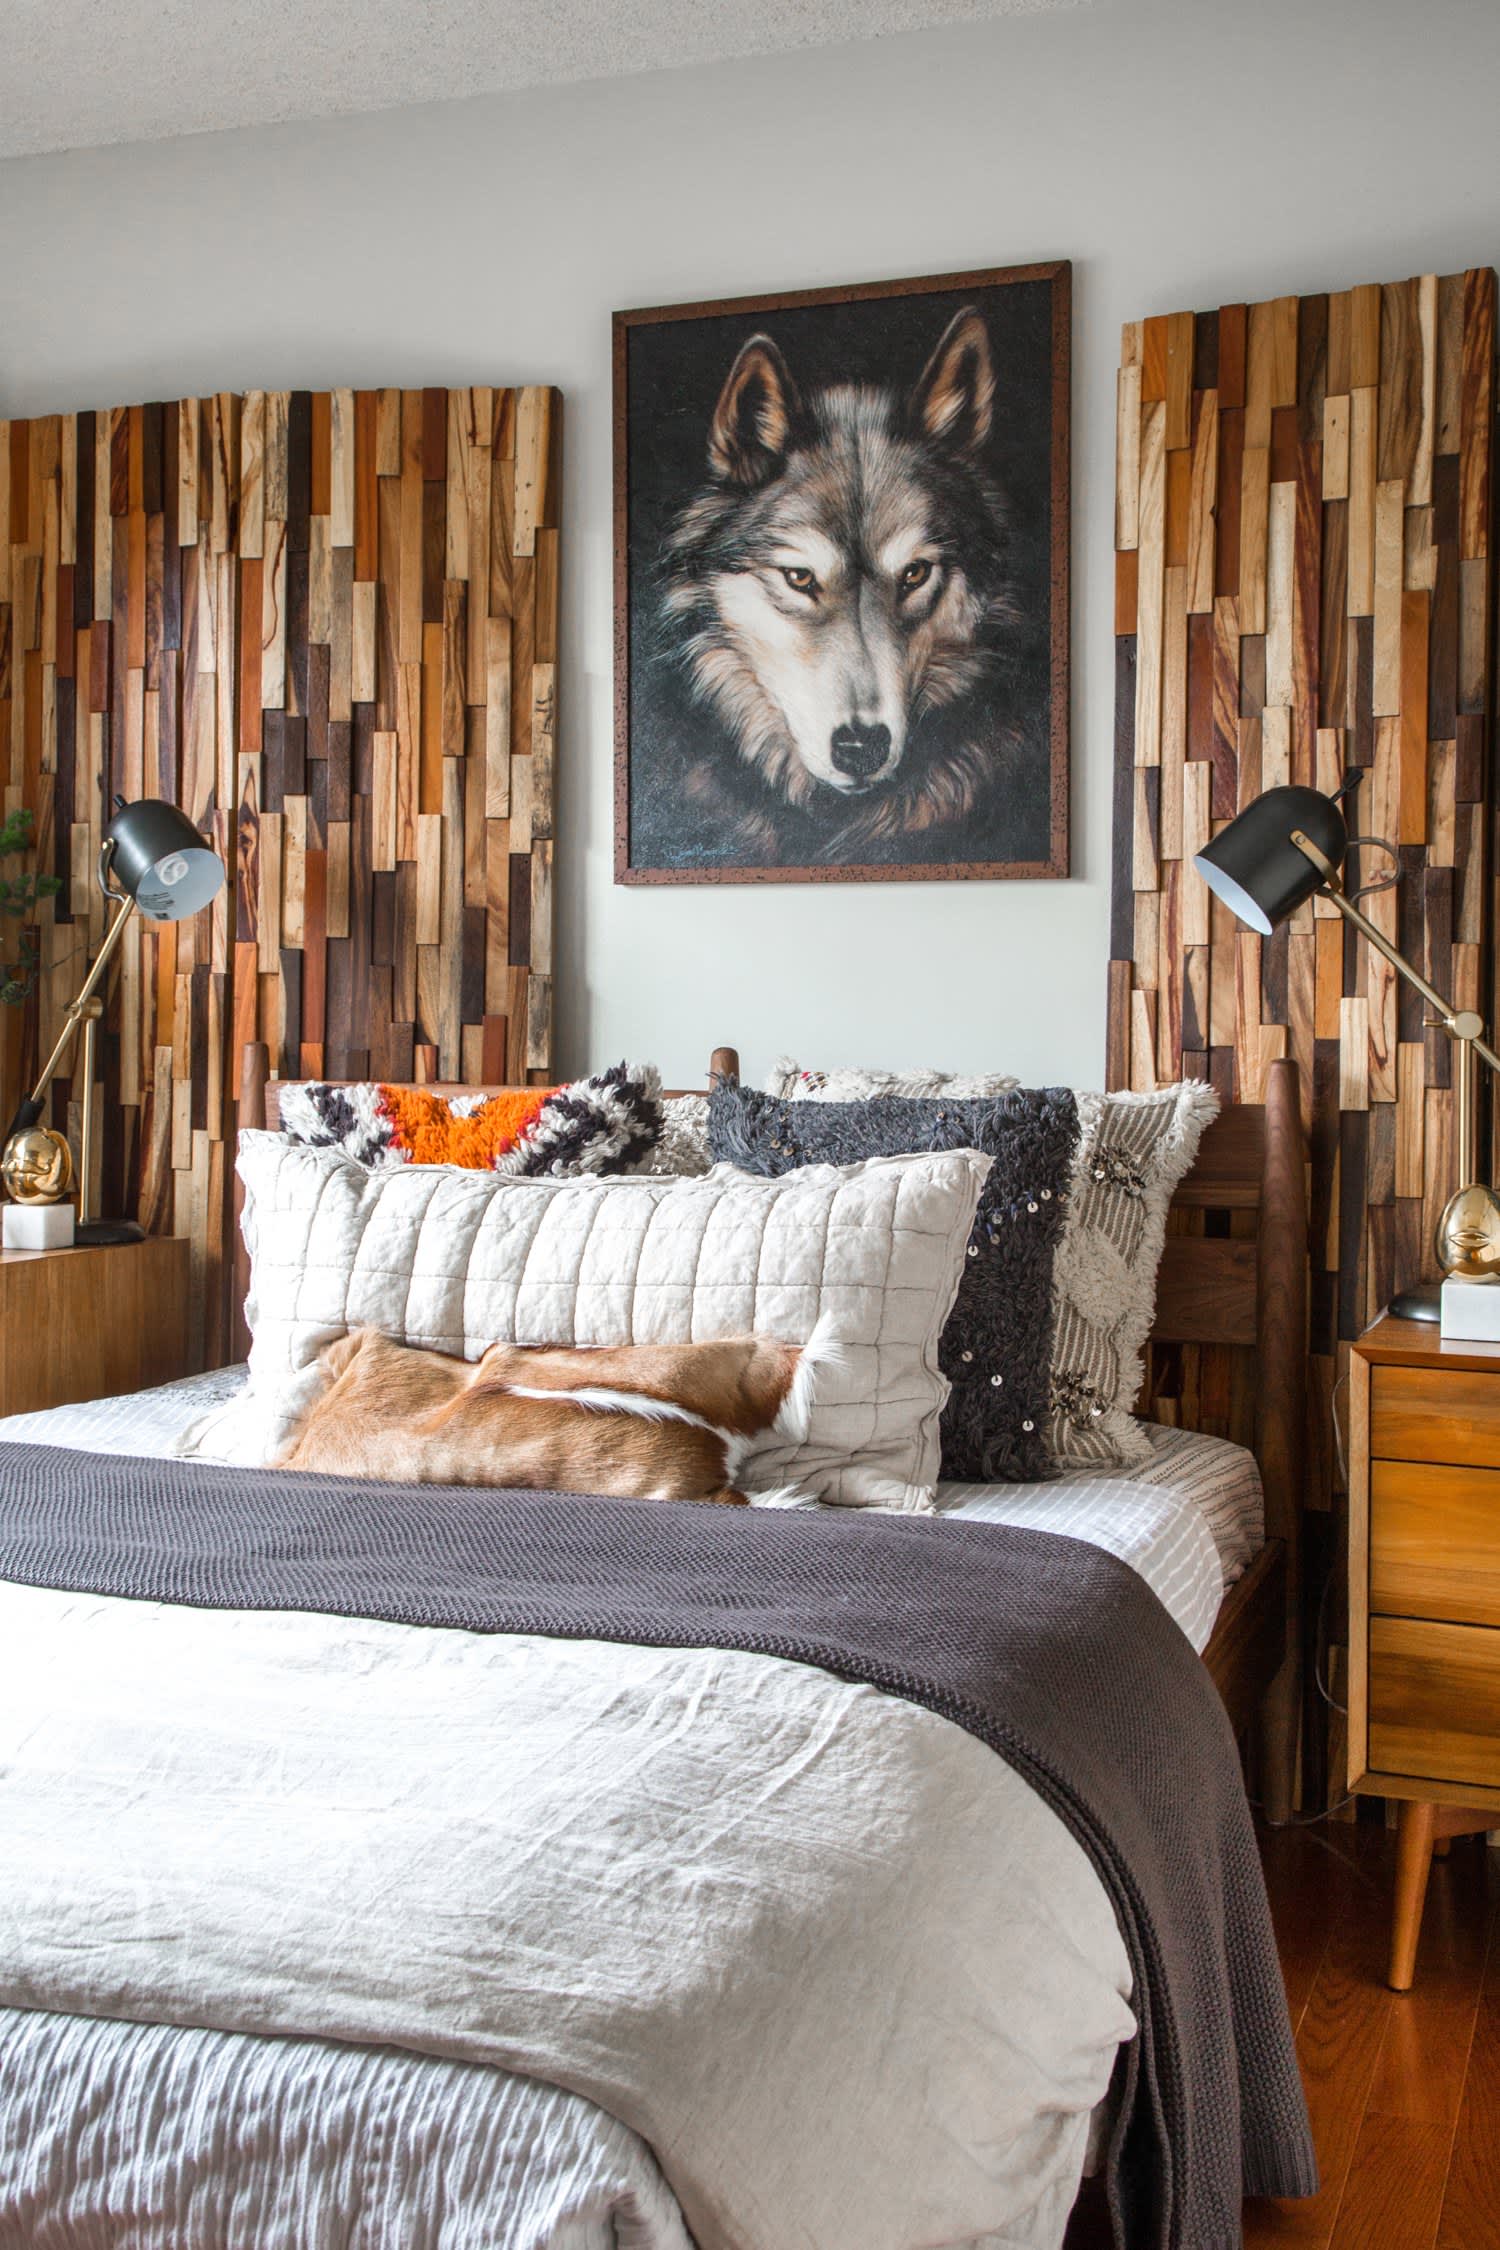 Decorating with Wood: 10 Warm, Woodsy Rooms & Details from Real Homes